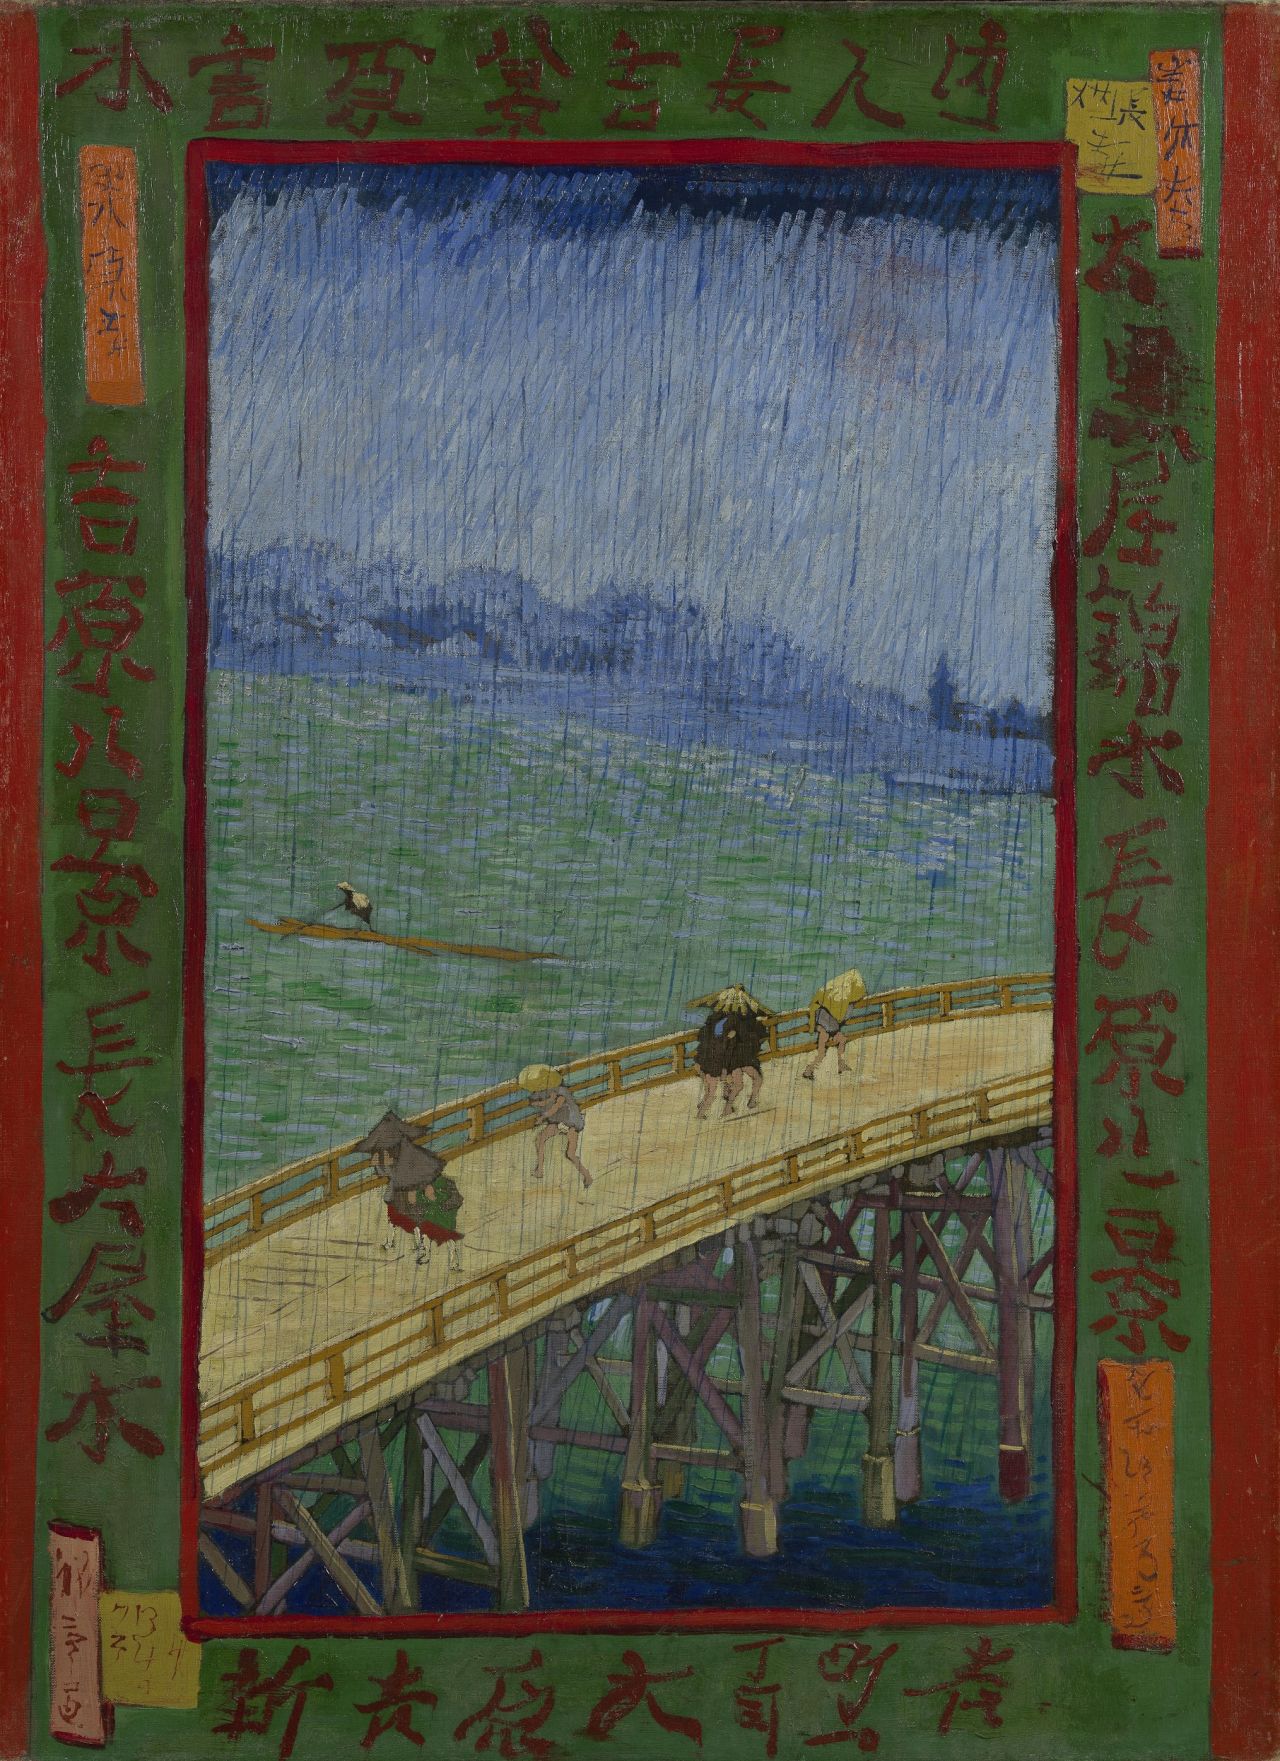 Van Gogh's "Bridge in the Rain (after Hiroshige)" (1887) was based on a print by Japanese artist Utagawa Hiroshige. Japanese characters can be seen around the painting's border.